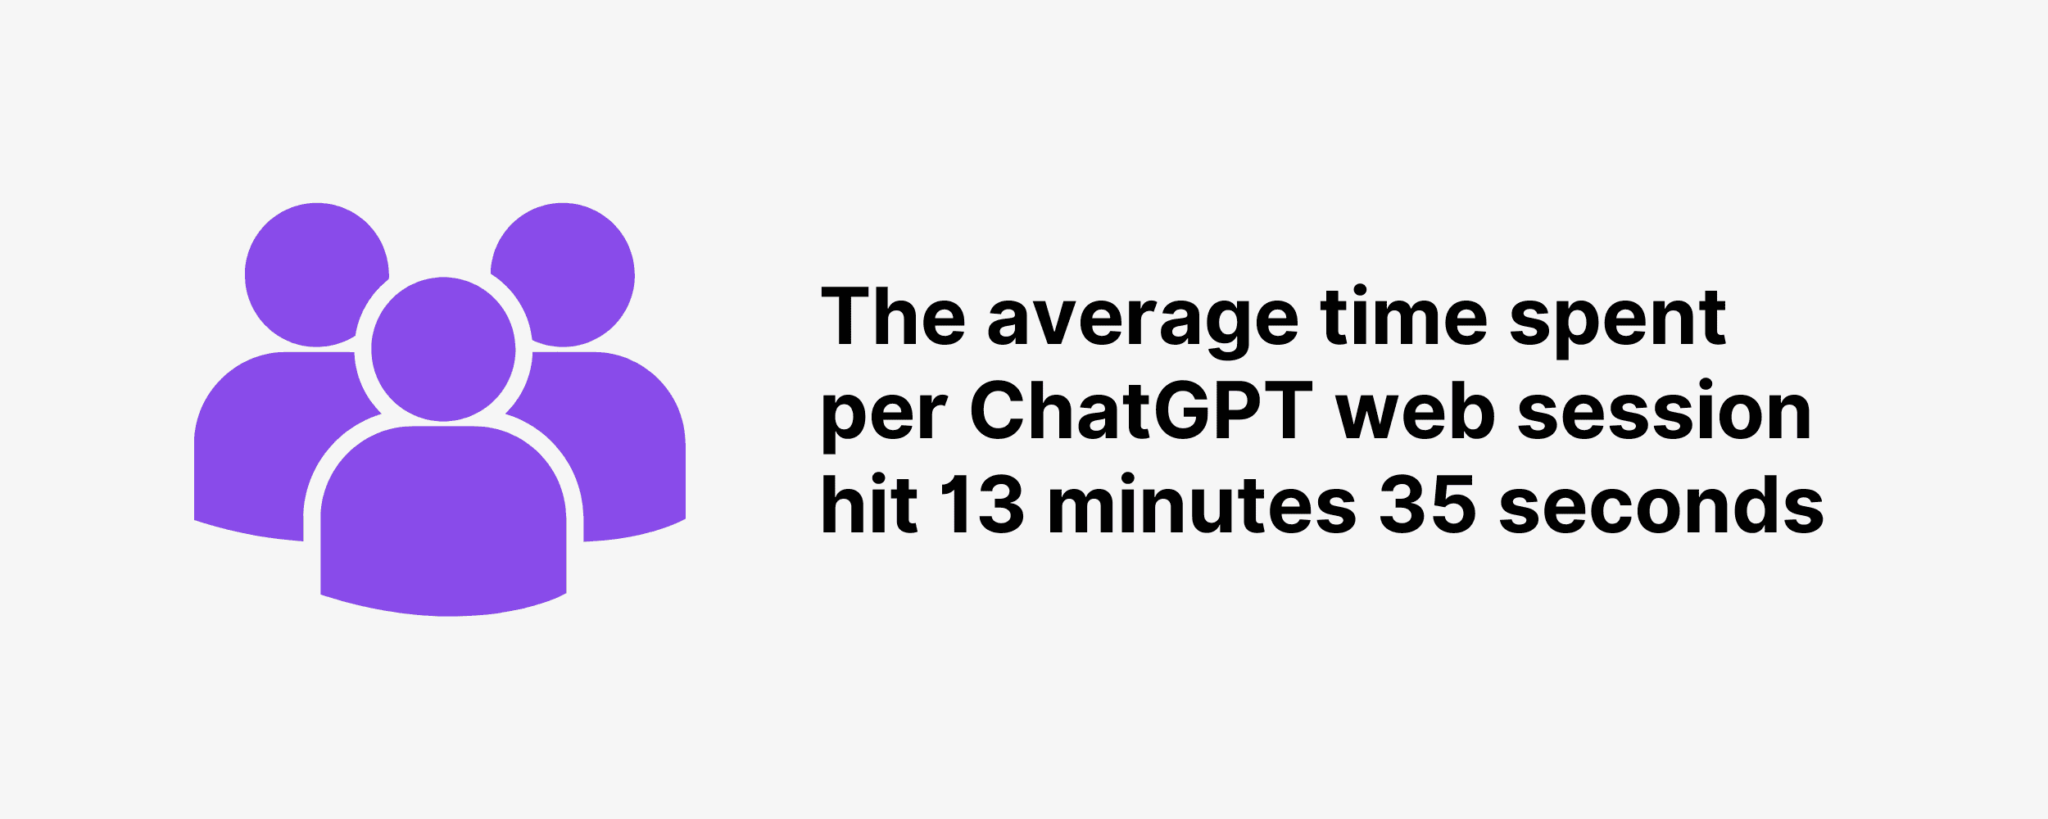 chatgpt-average-time-spent ChatGPT / OpenAI Statistics: How Many People Use ChatGPT?